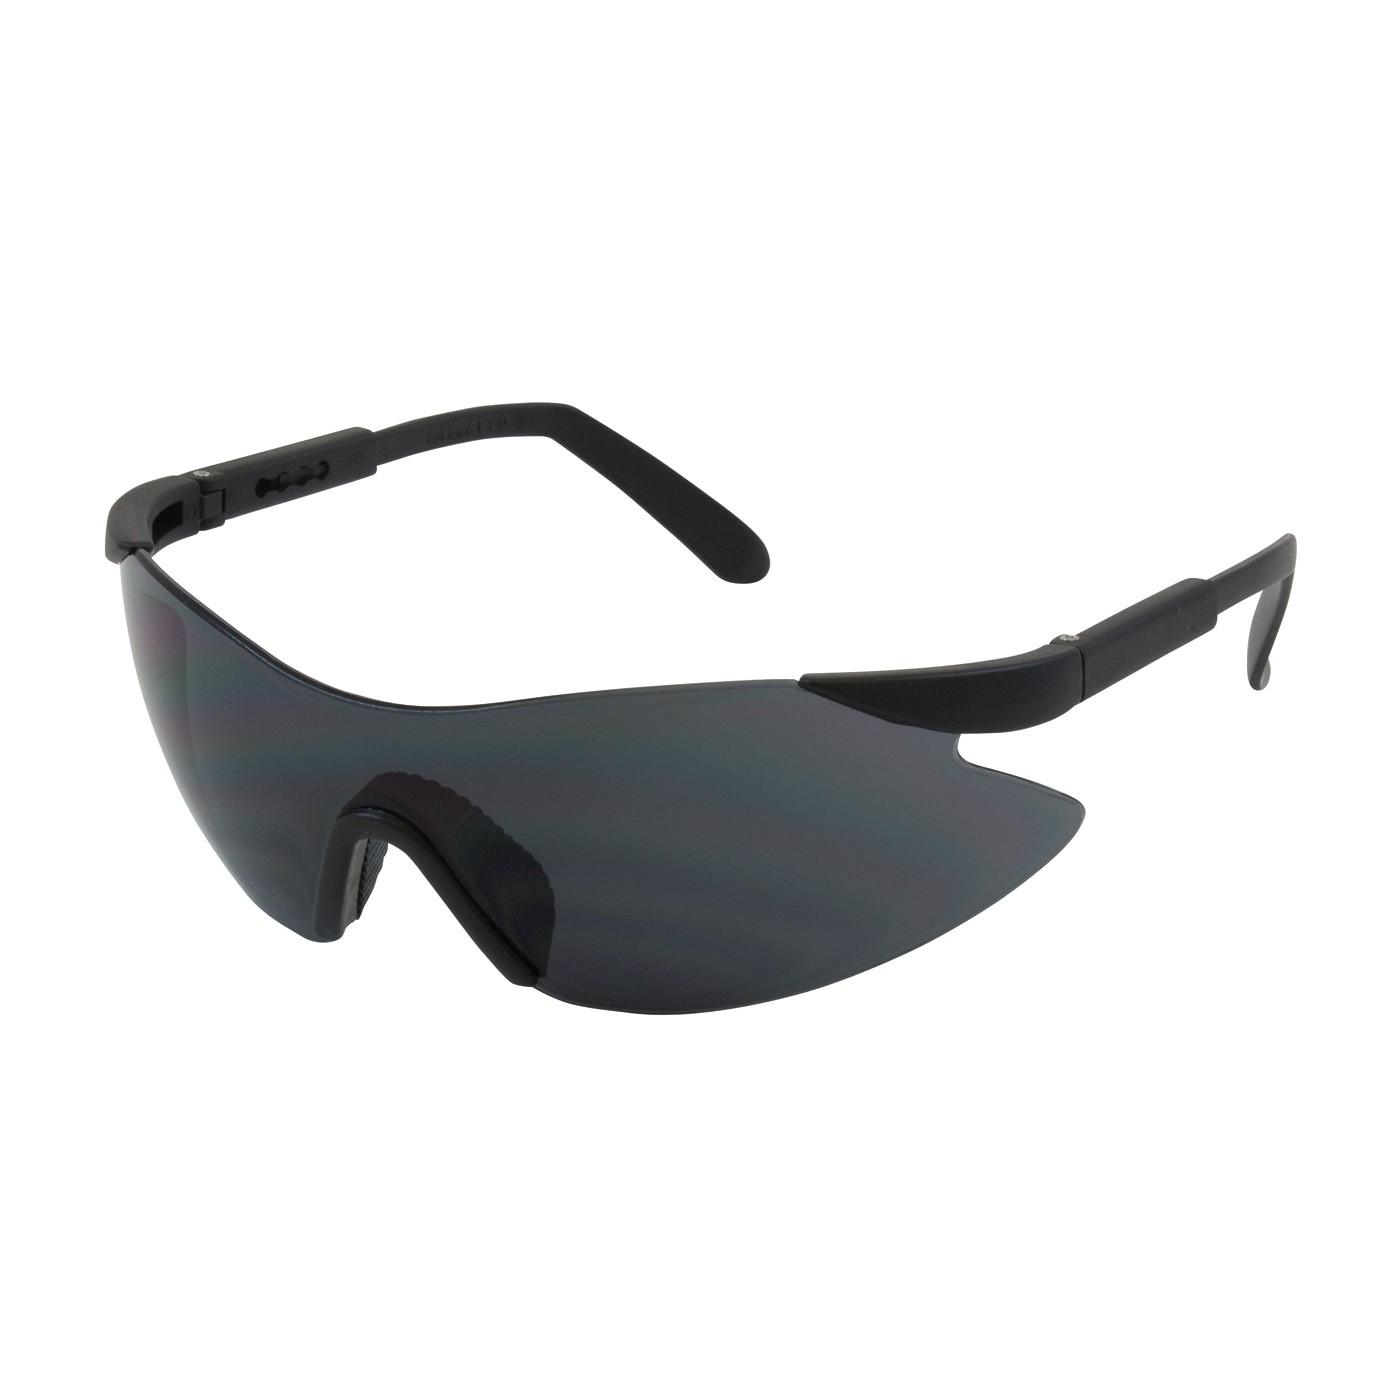 Wilco™ Rimless Safety Glasses with Black Temple, Gray Lens and Anti-Scratch Coating  (#250-92-0021)